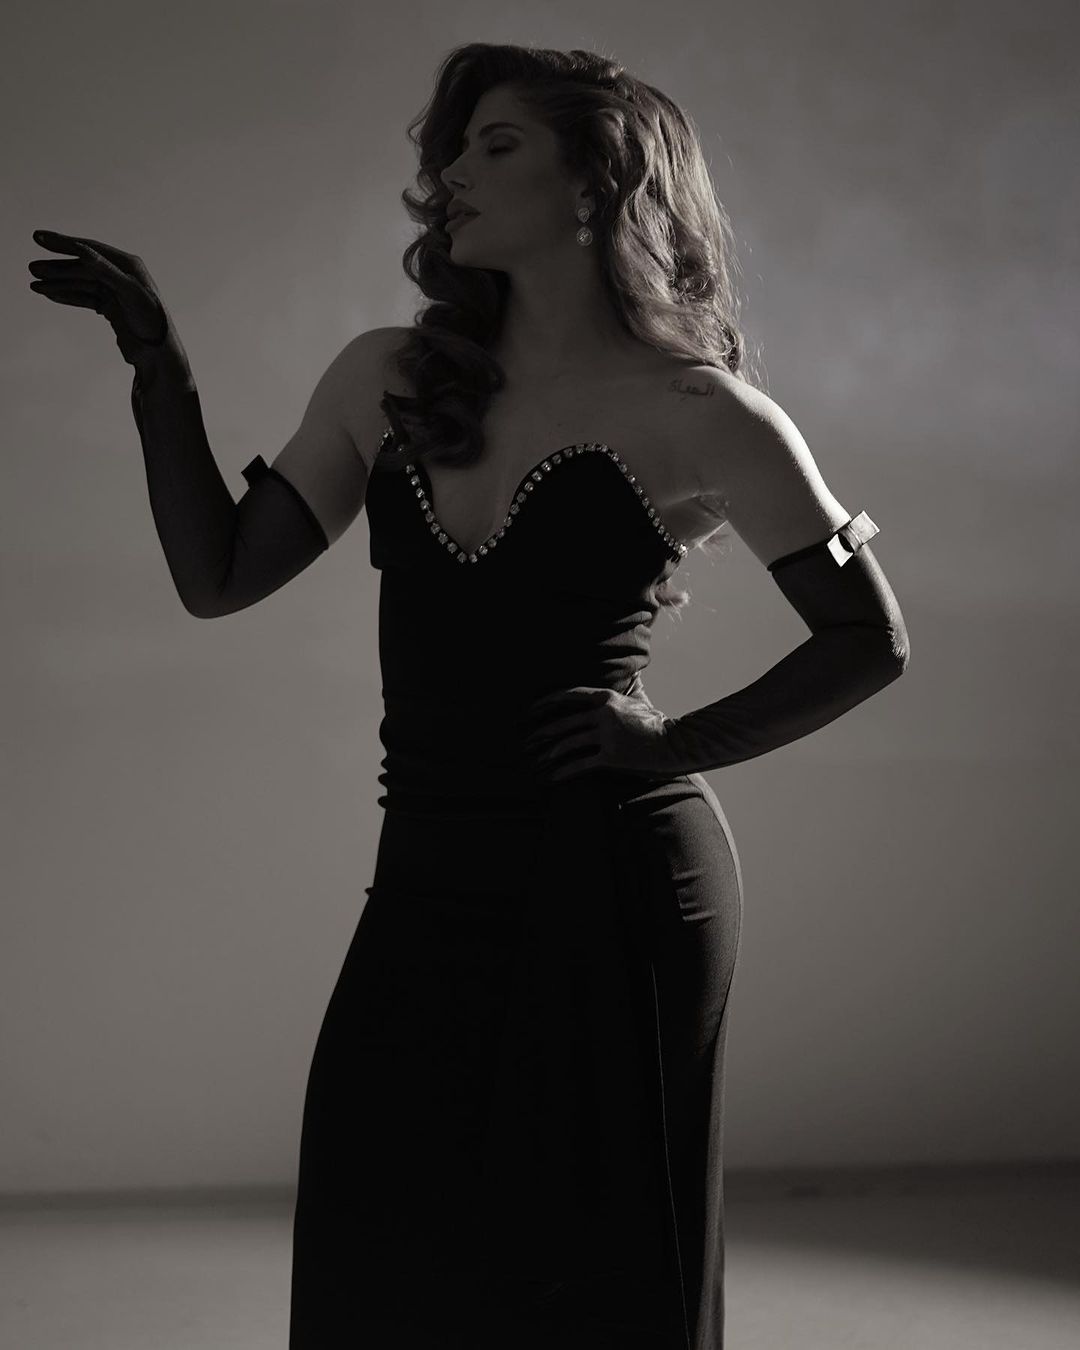 A silhouette of a poised woman dressed in a classic evening gown with refined adornments